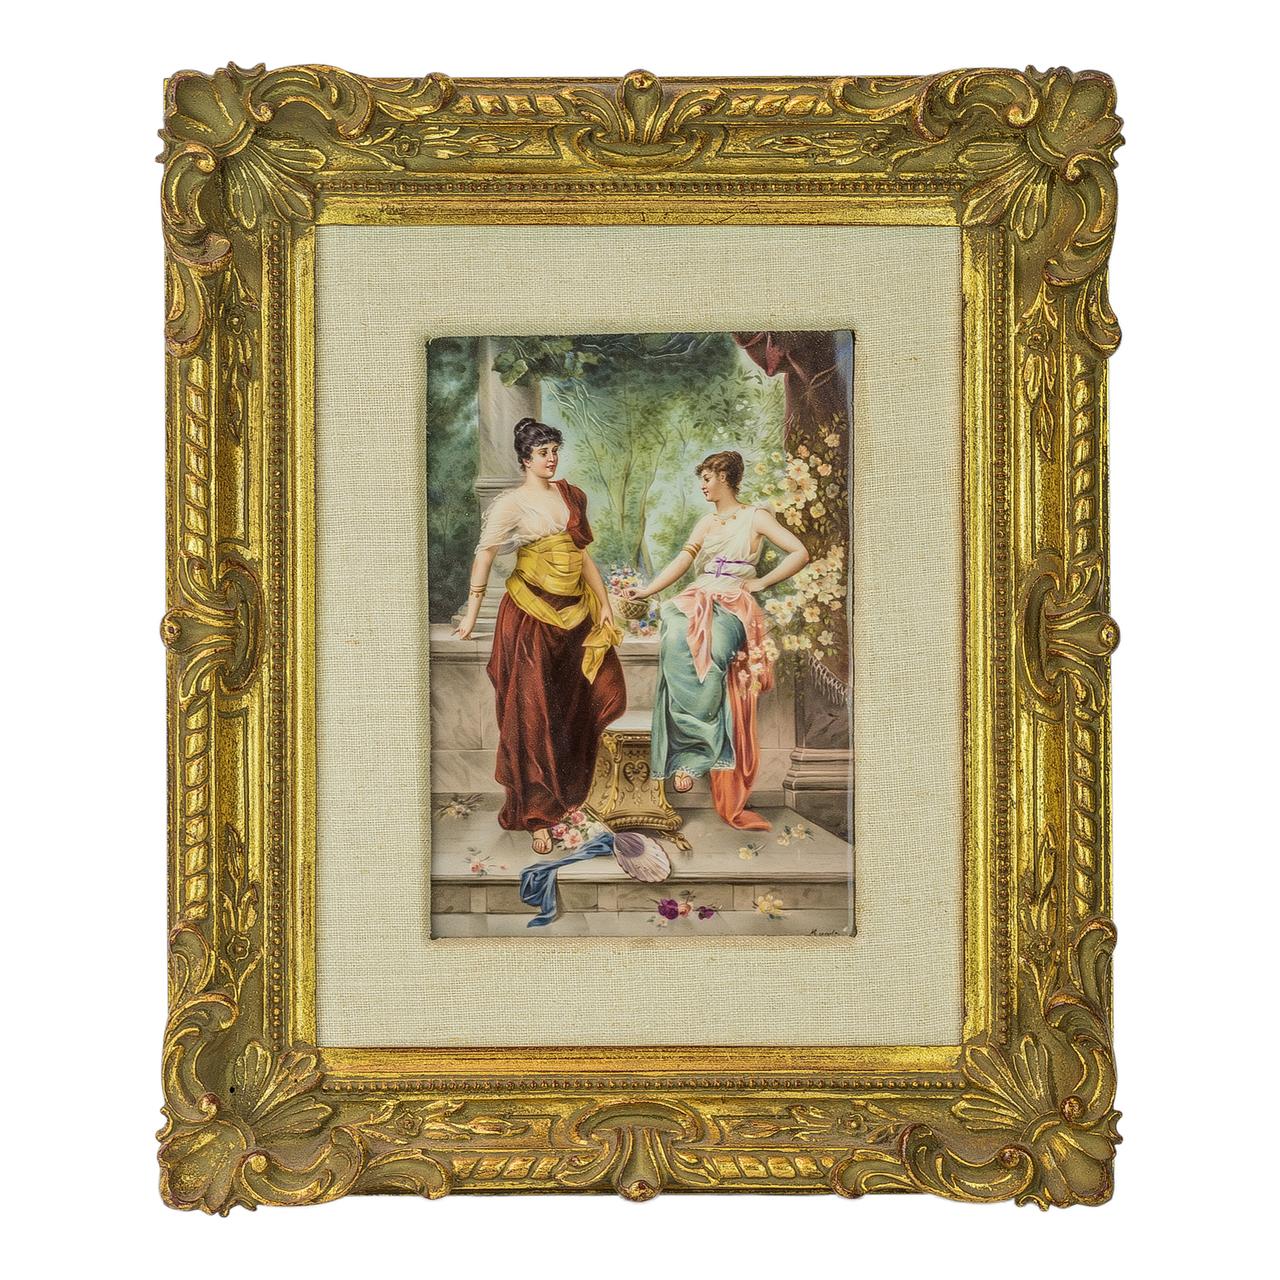  K.P.M. Porcelain of Two Beauties in Classical Dress in the Courtyard - Robe classique dans la cour 